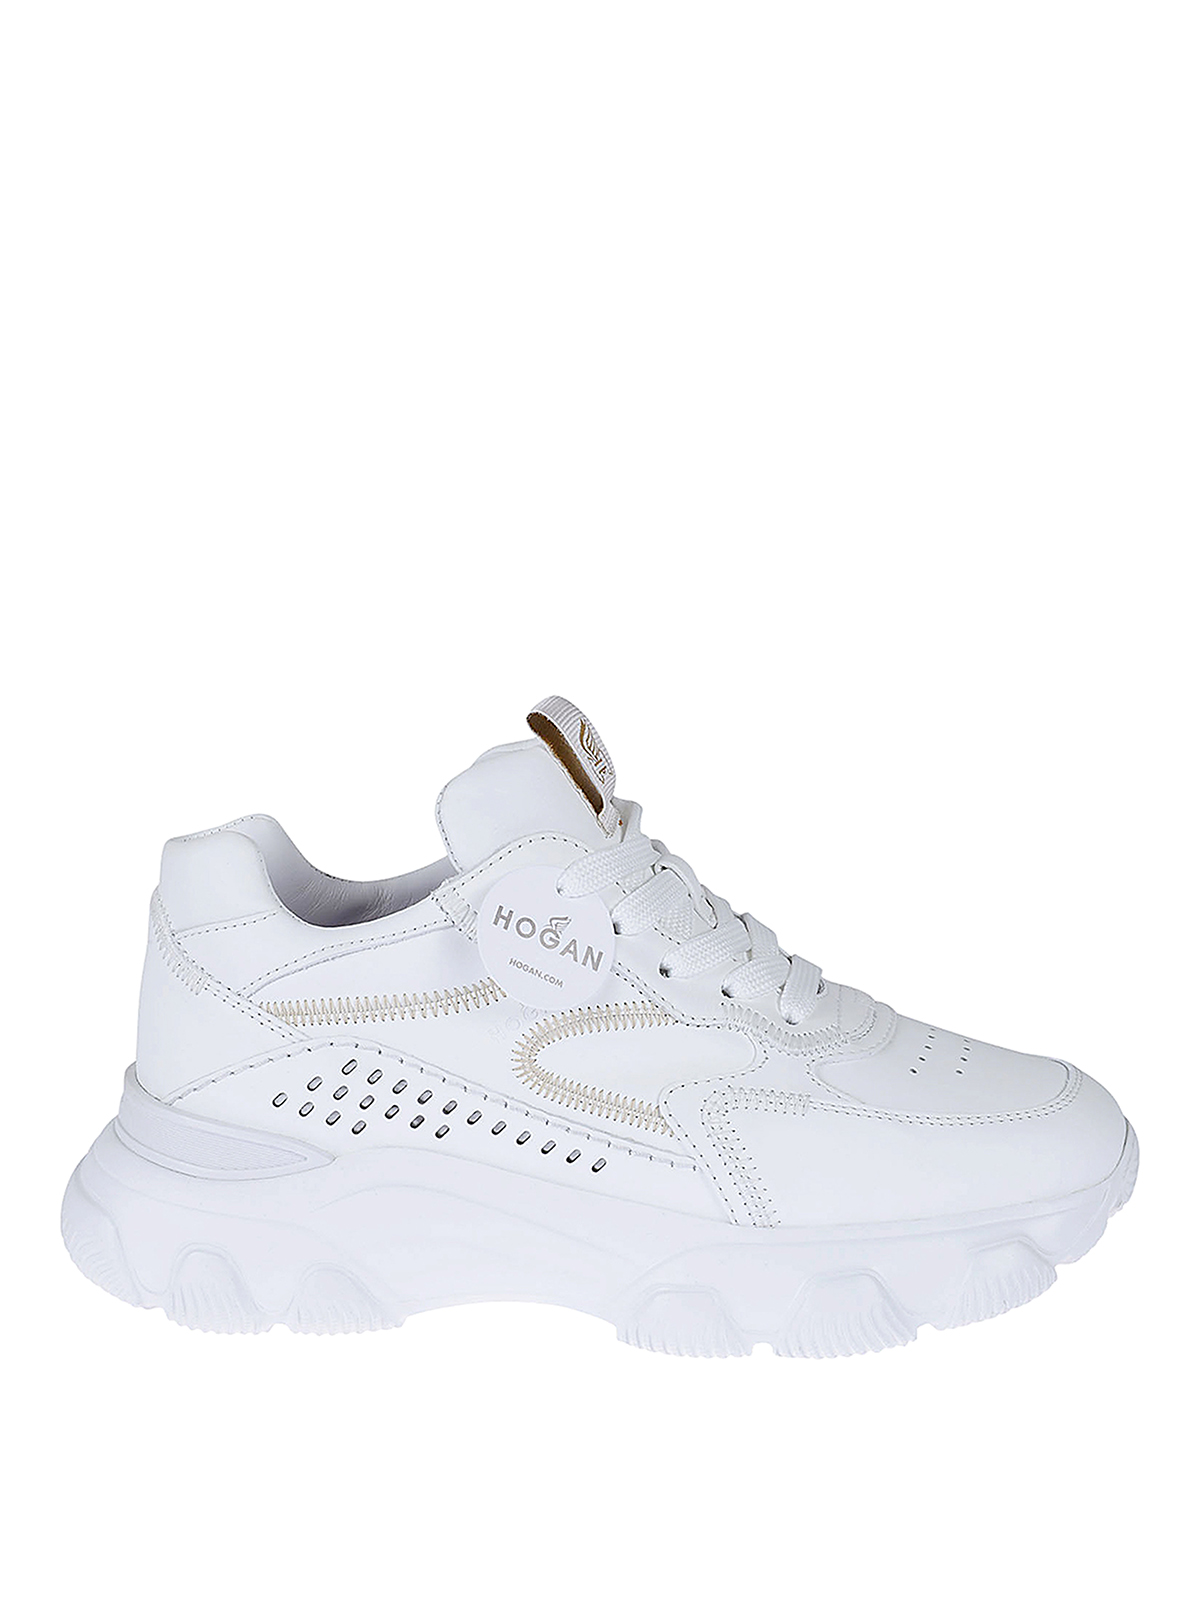 Hogan Hyperactive Leather Sneakers In White